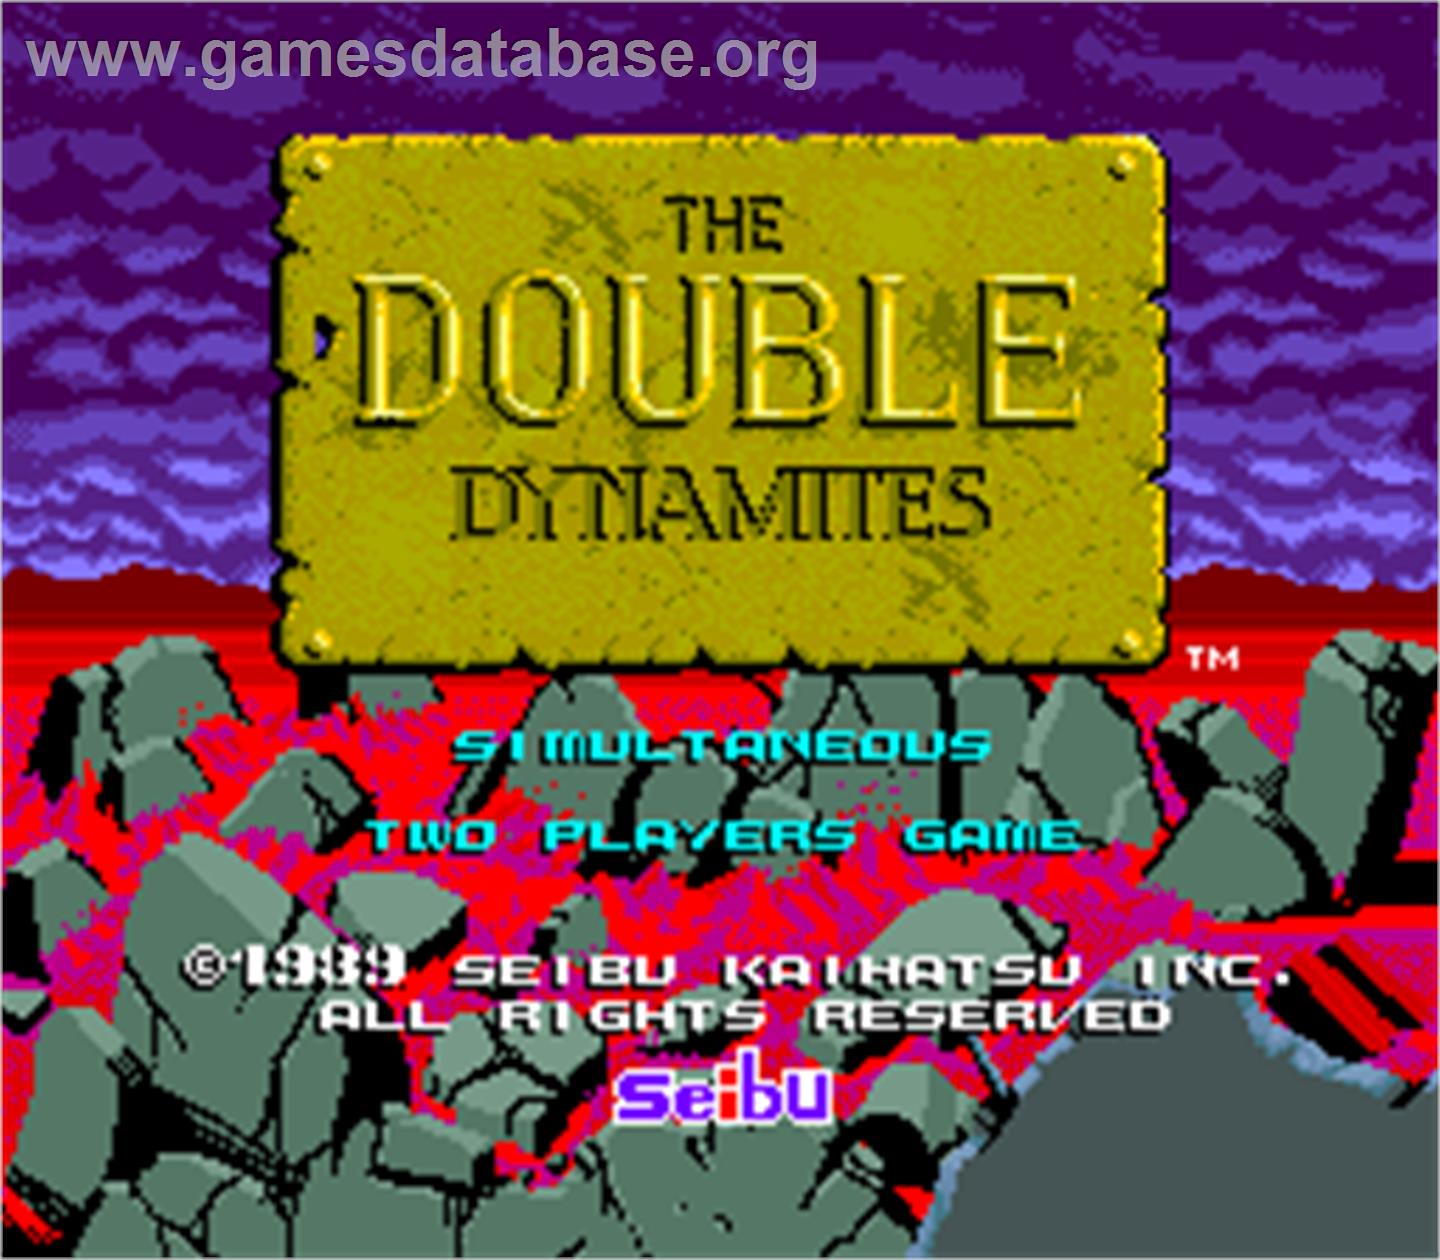 The Double Dynamites - Arcade - Artwork - Title Screen